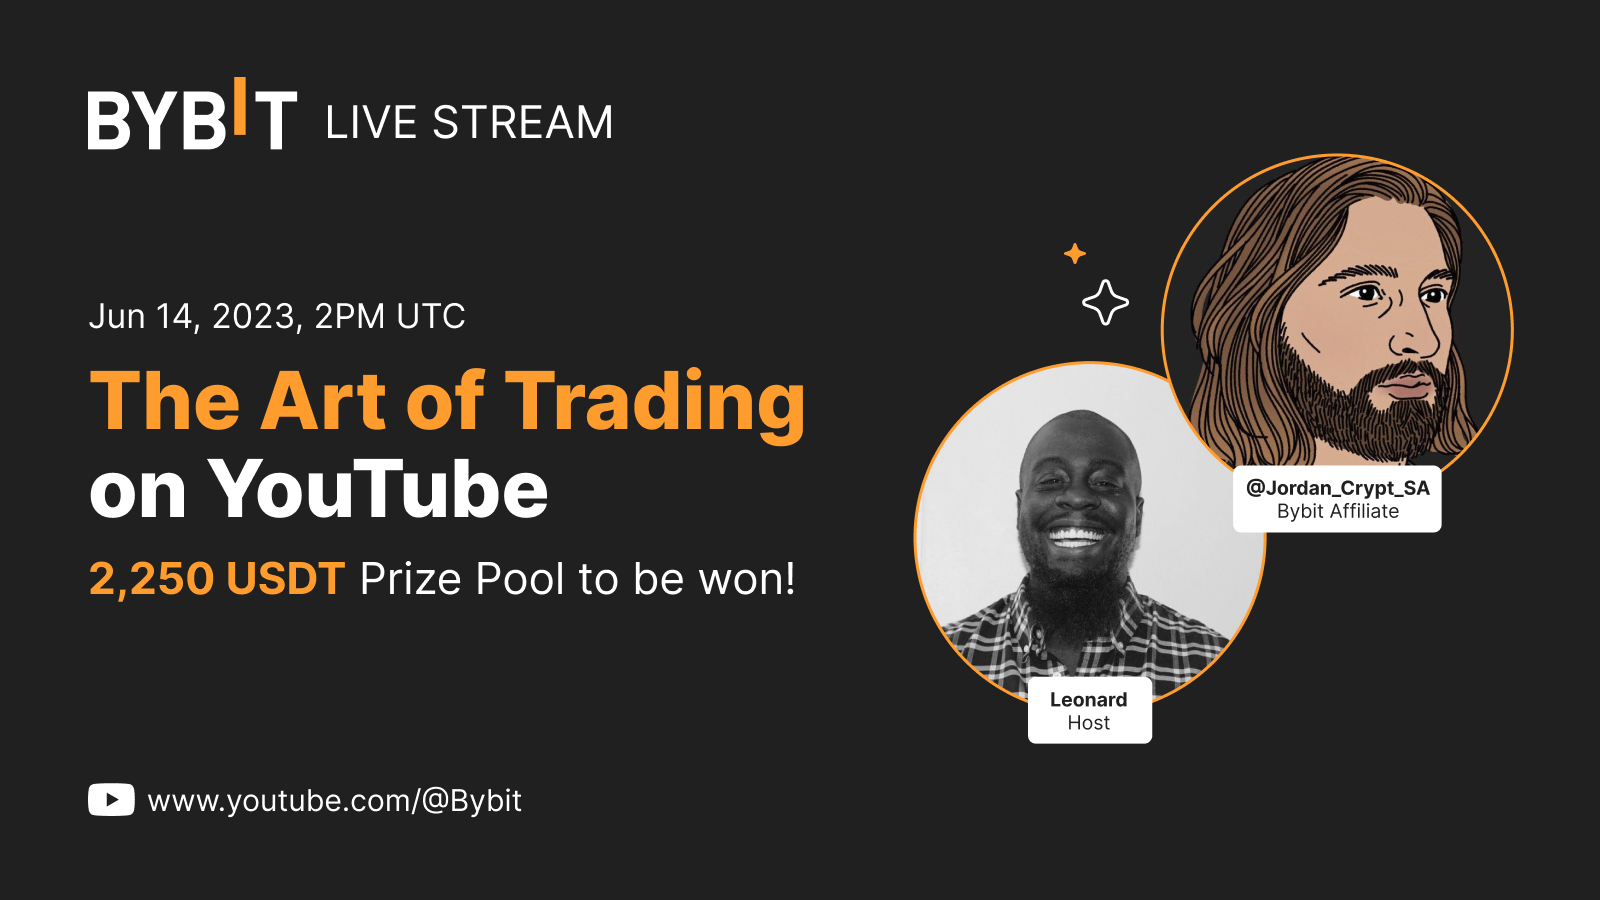 Bybit Announcement Catch the Art of Trading Live on YouTube Live Stream and Share the 2,250 USDT Prize Pool!